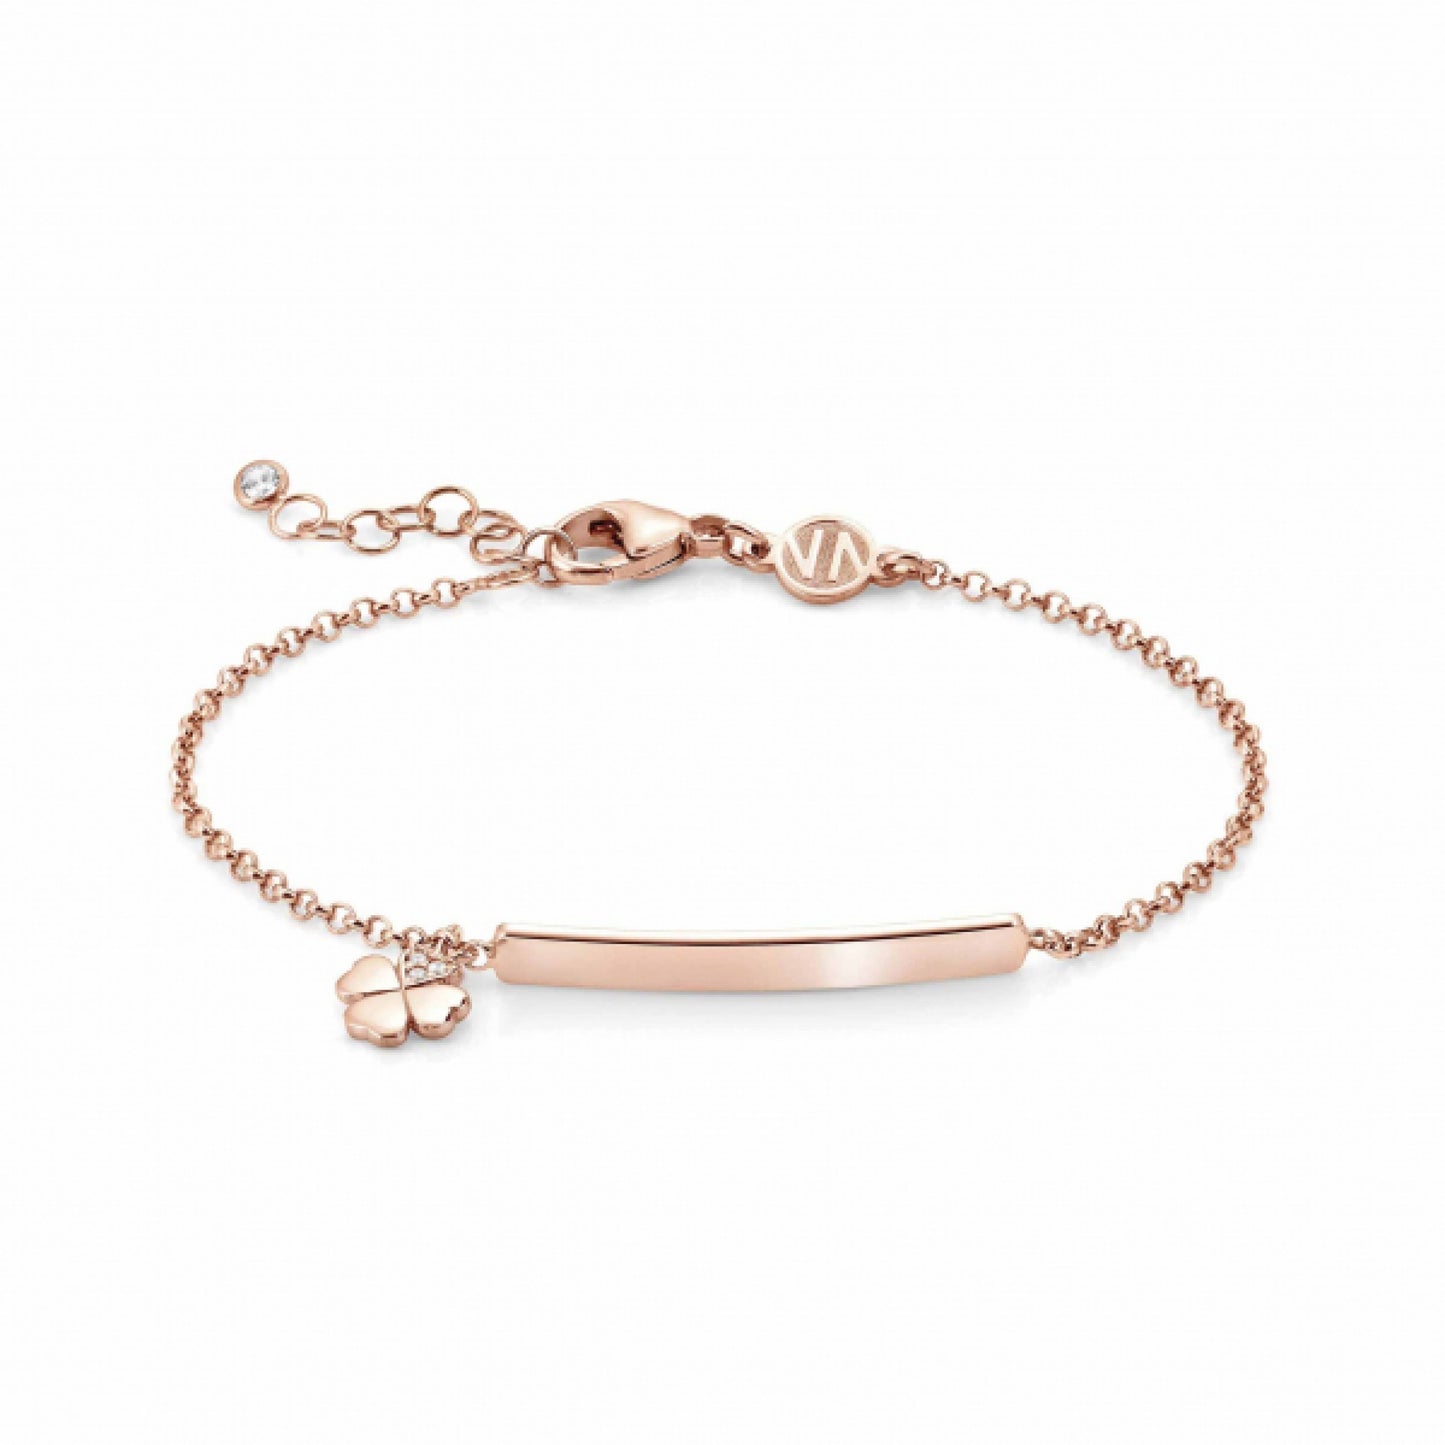 Gioie Rose Gold Bracelet with Four-Leaf Clover Pendant | Nomination Italy | Luby 